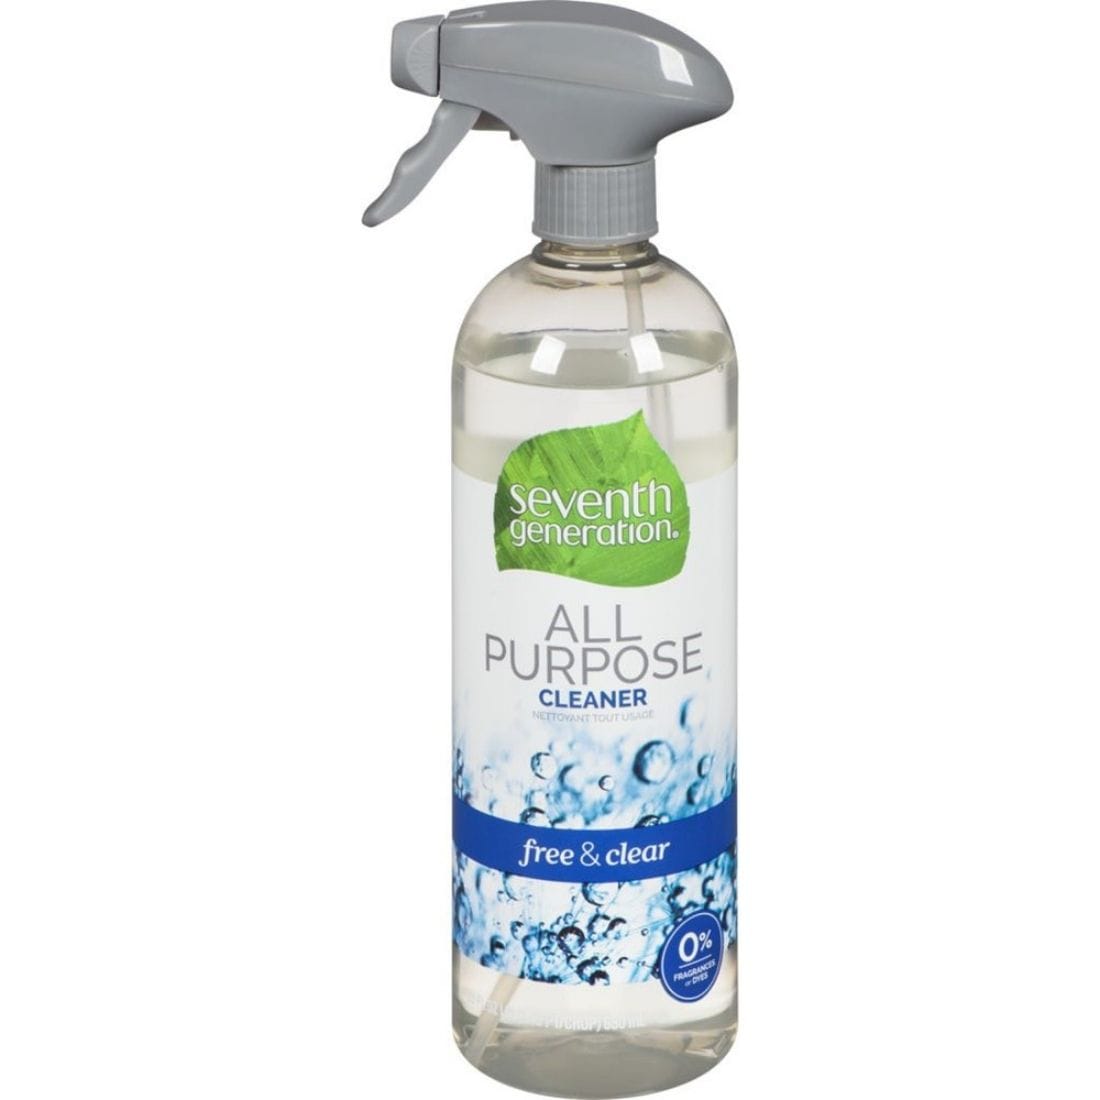 Seventh Generation All Purpose Cleaner - Free & Clear, 710ml